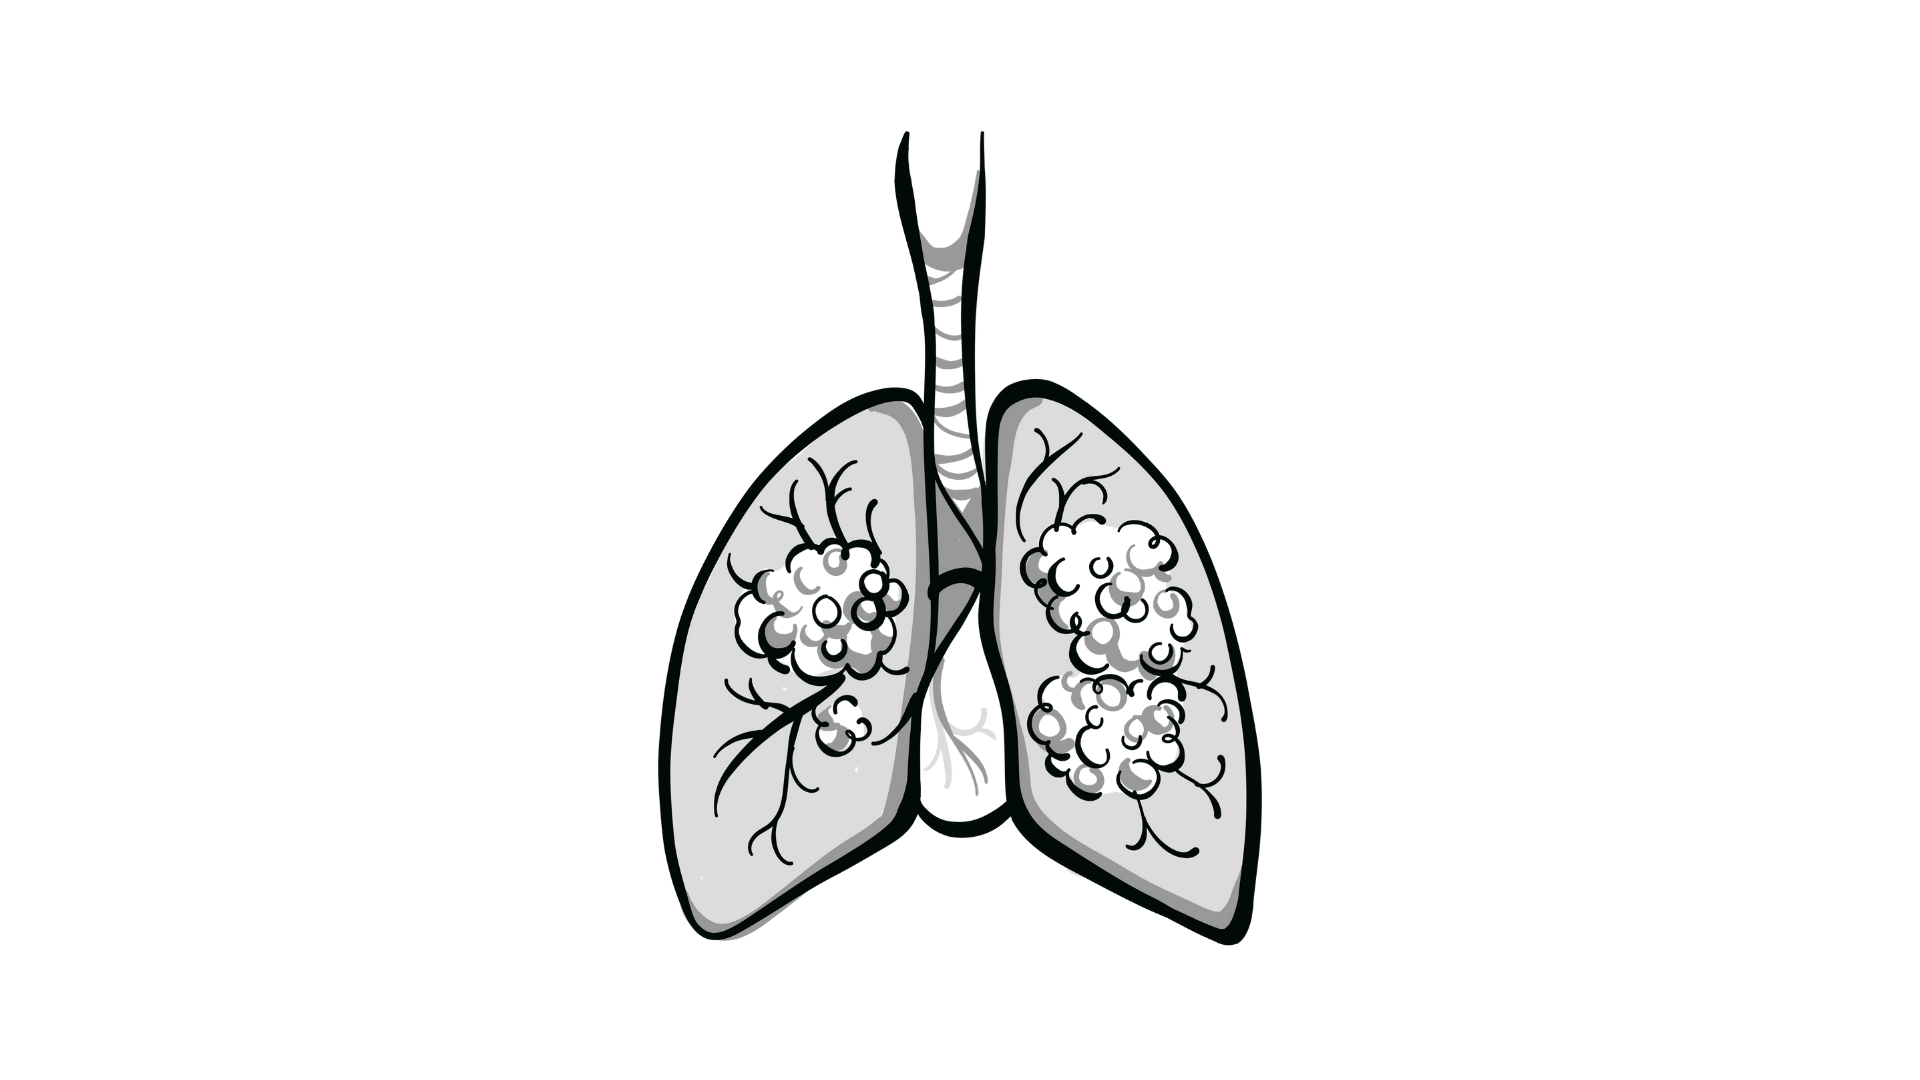 Dato-DXd Misses Significance for OS in Advanced Non-Small Cell Lung Cancer